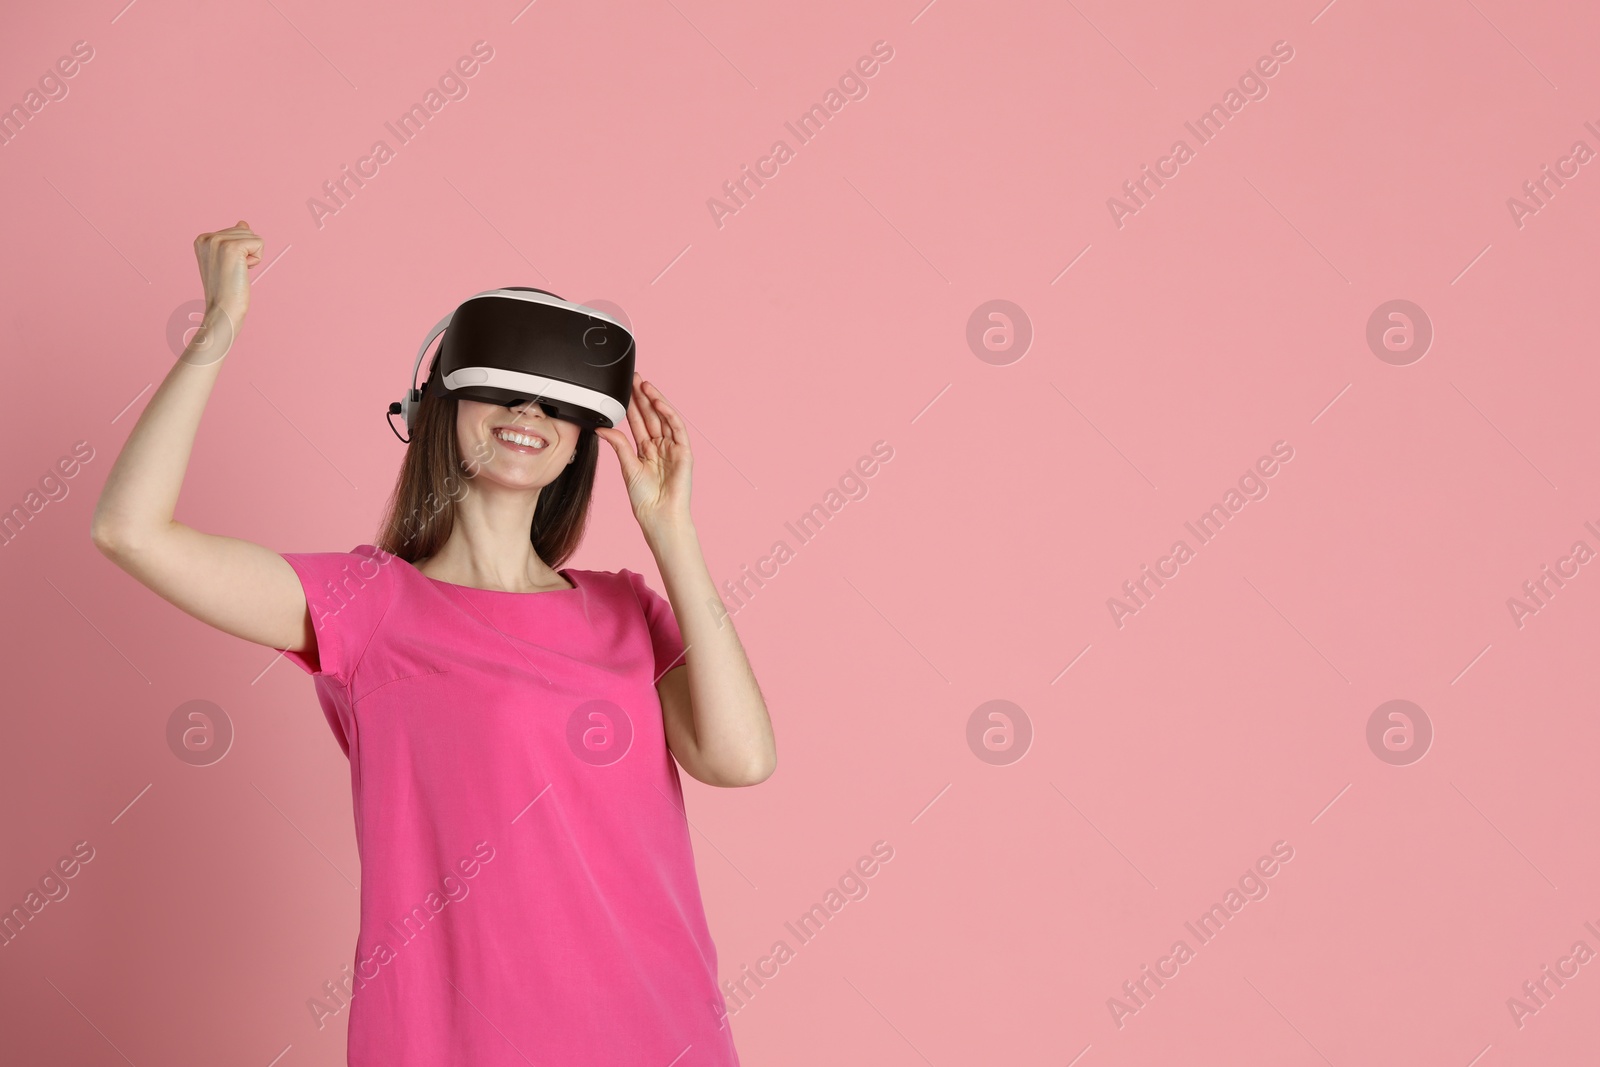 Photo of Smiling woman using virtual reality headset on pink background, space for text